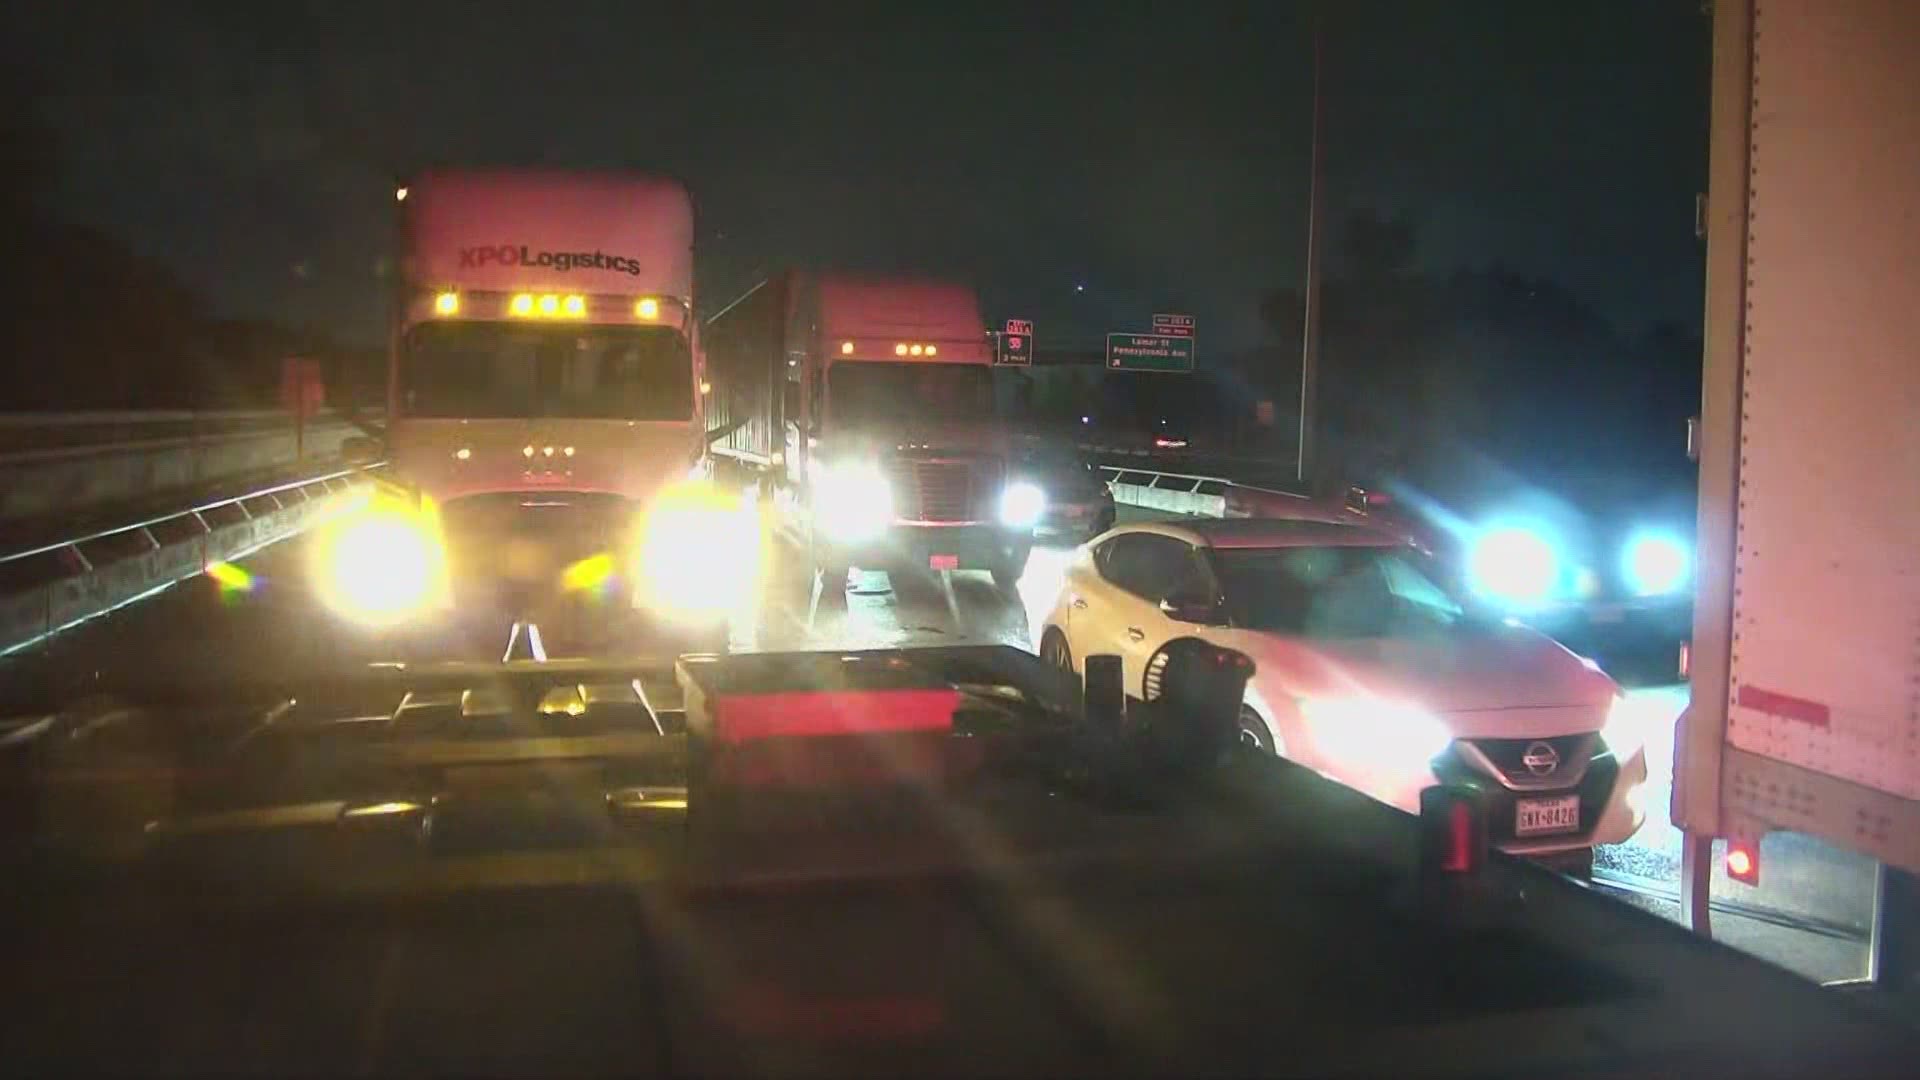 A jackknifed semi truck was blocking multiple lanes early Tuesday morning.